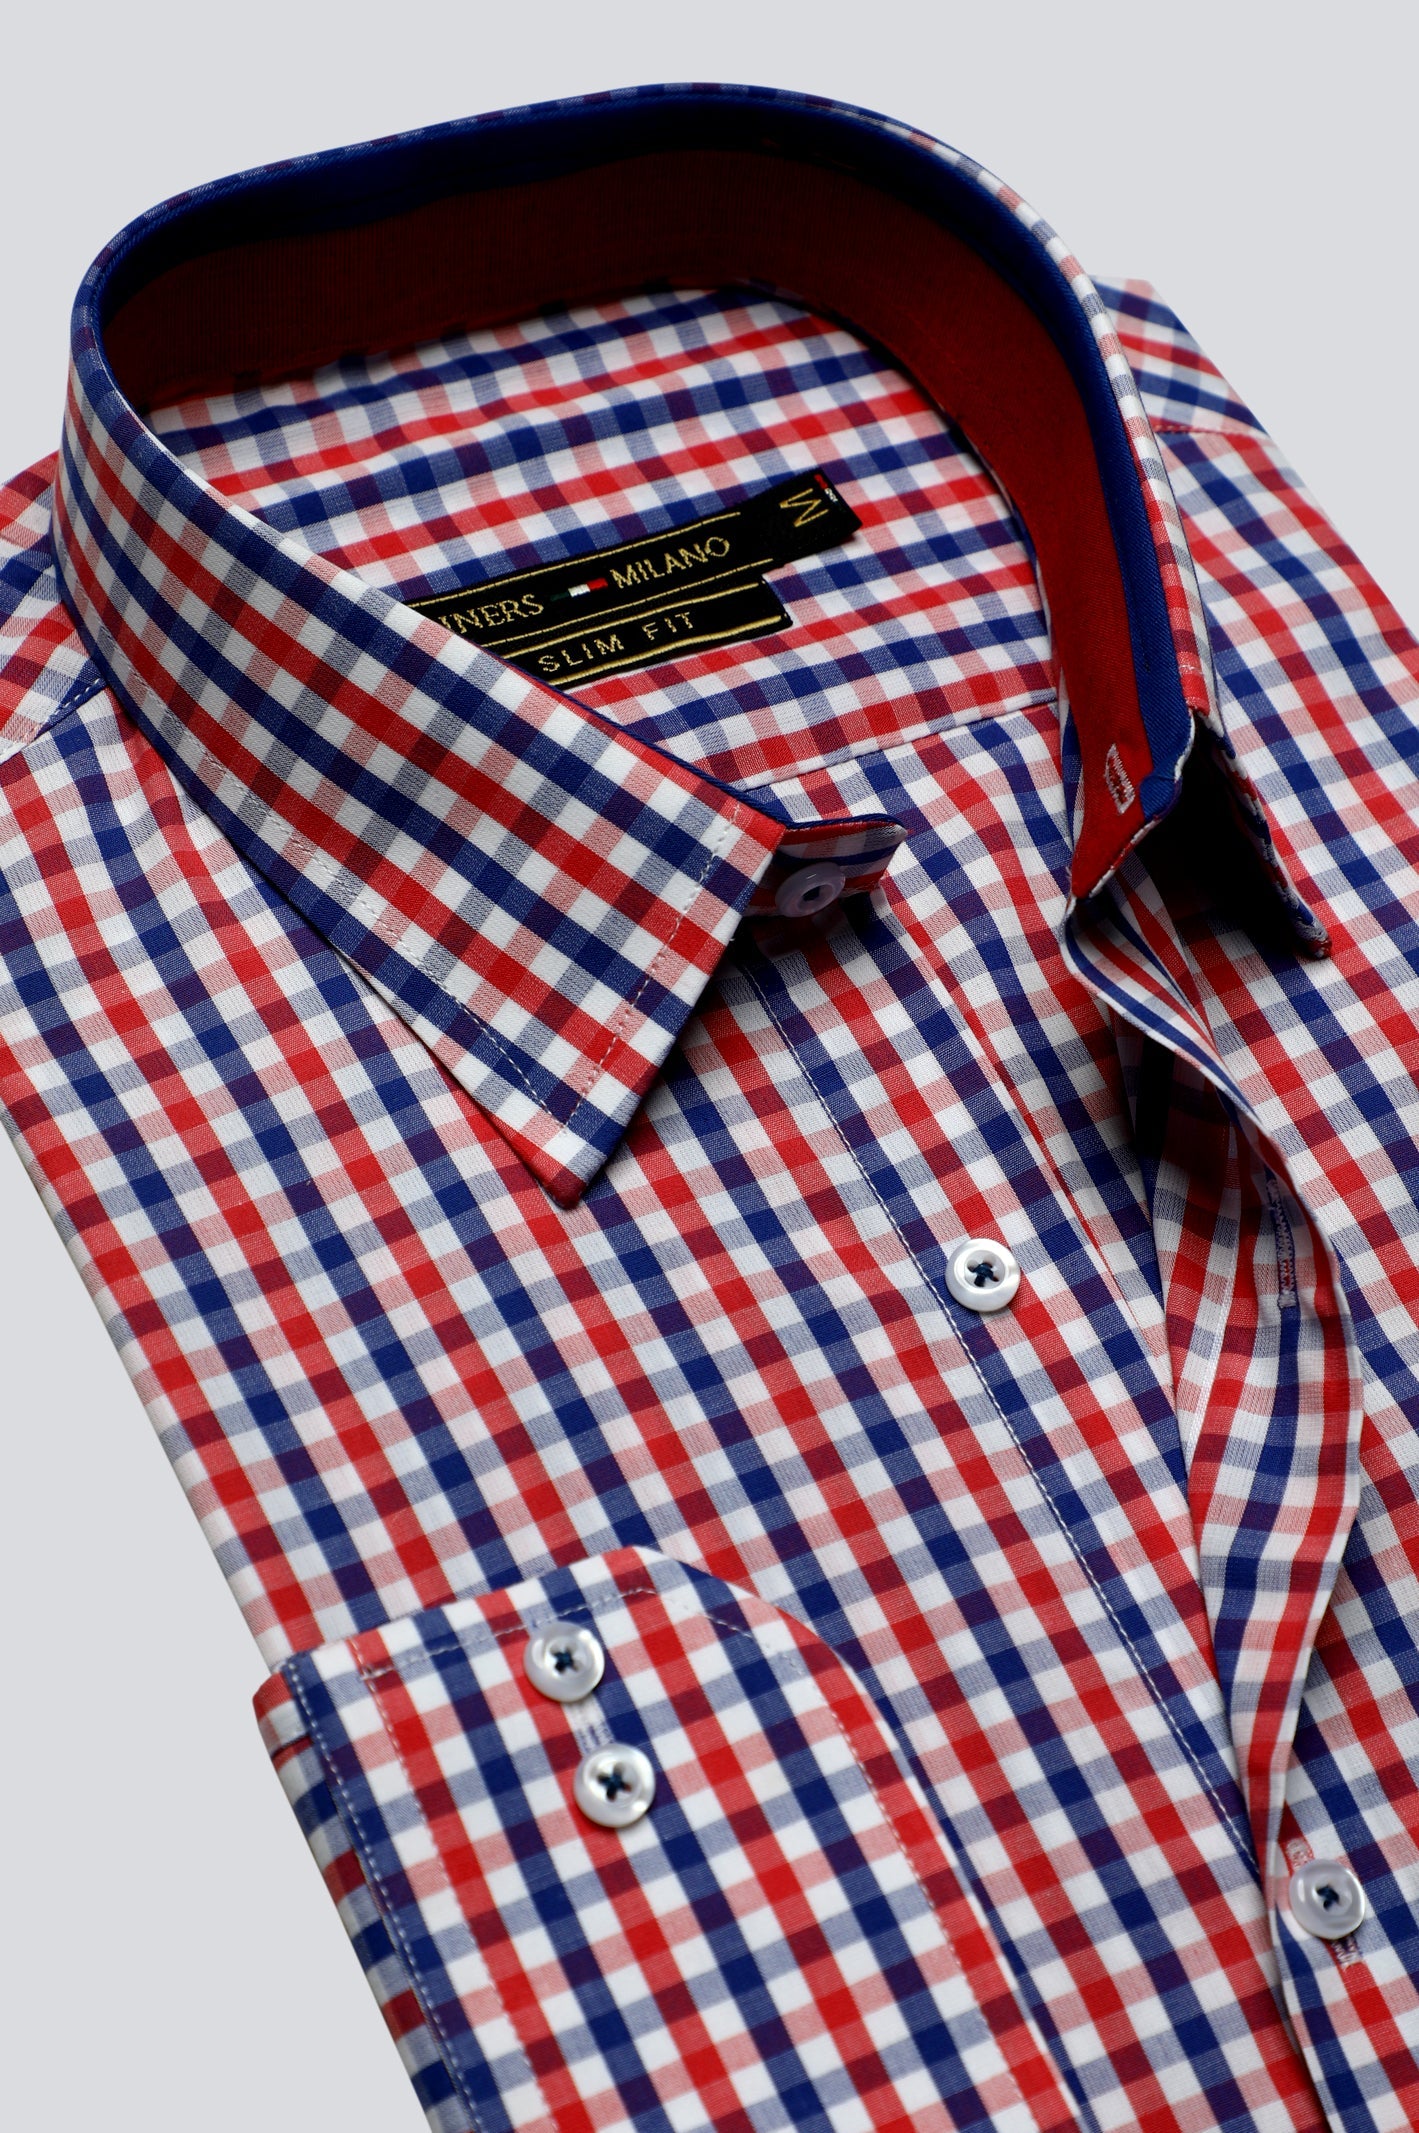 Multicolor Gingham Check Casual Milano Shirt for Men - Diners